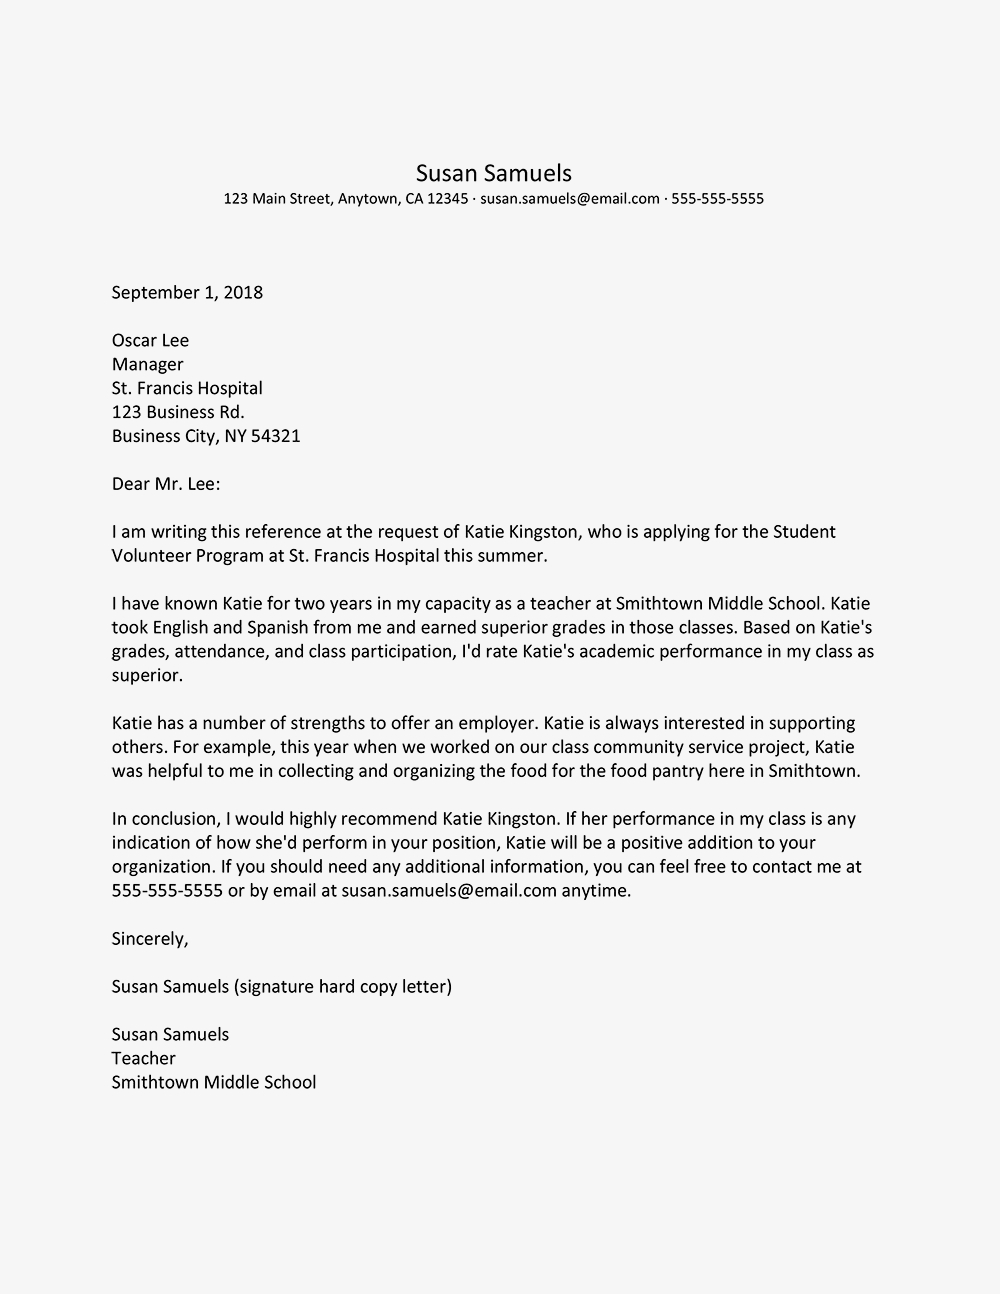 university reference letter example ucas